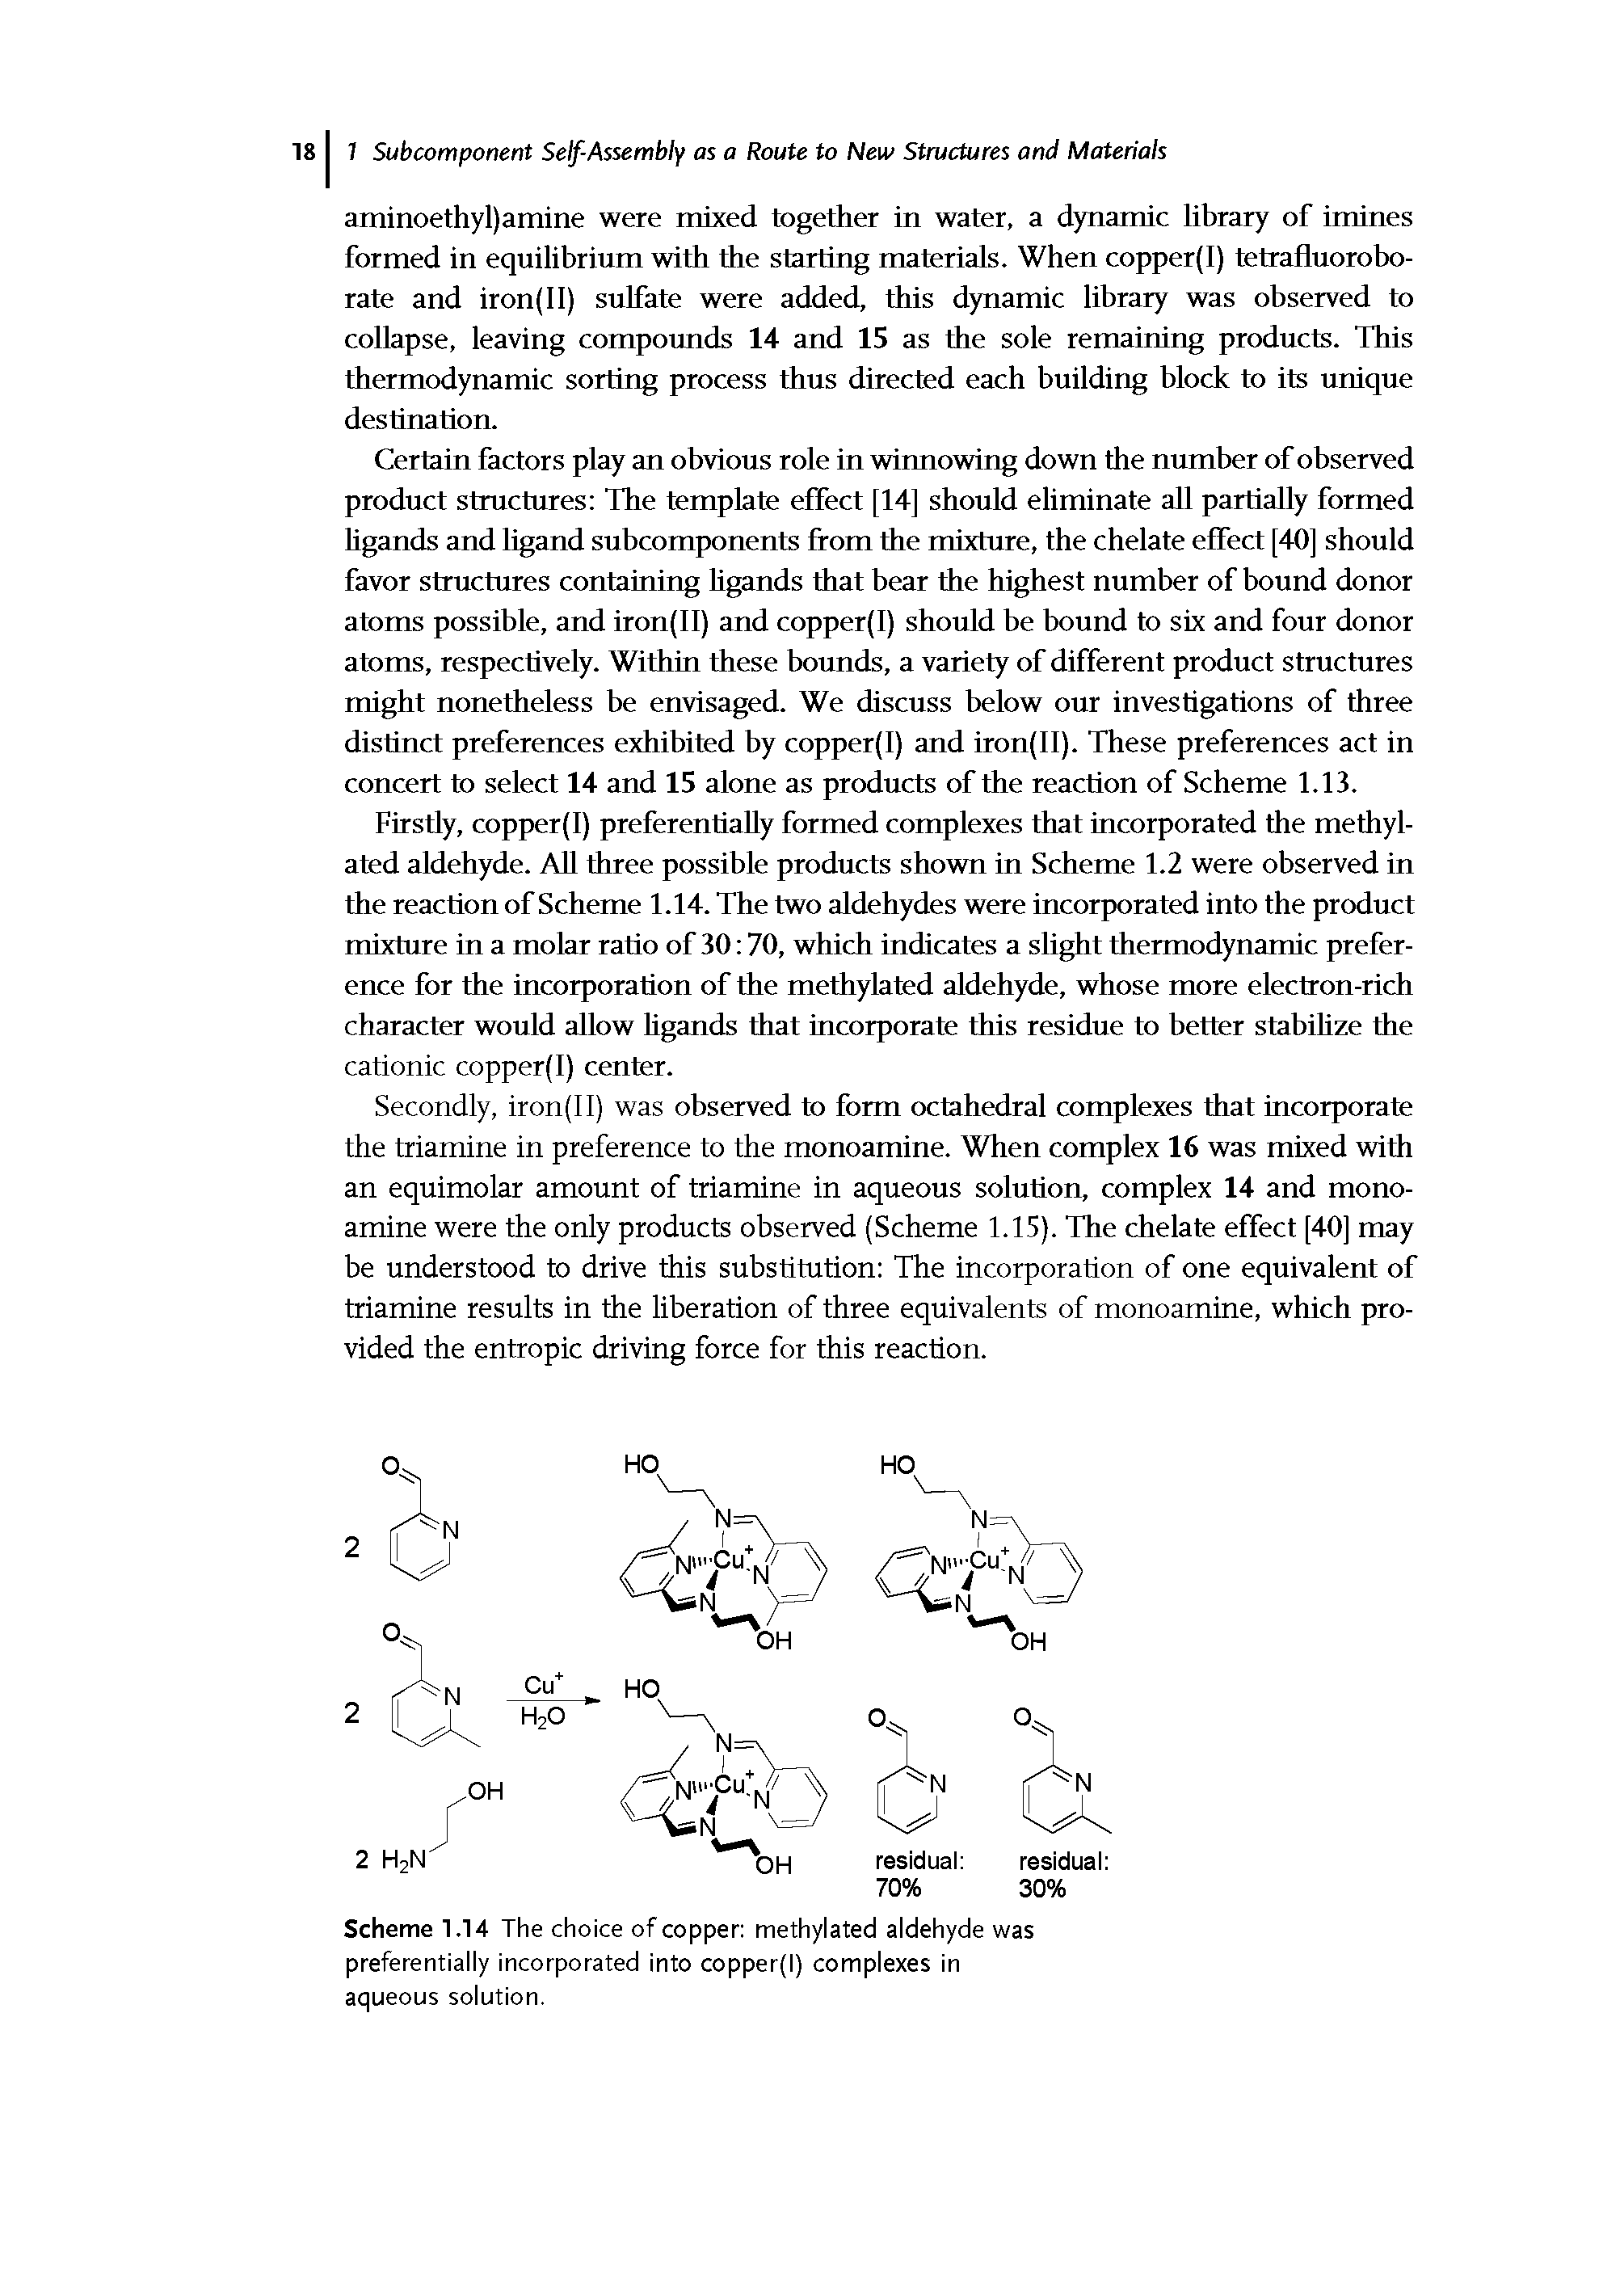 Scheme 1.14 The choice of copper methylated aldehyde was preferentially incorporated into copper(l) complexes in aqueous solution.